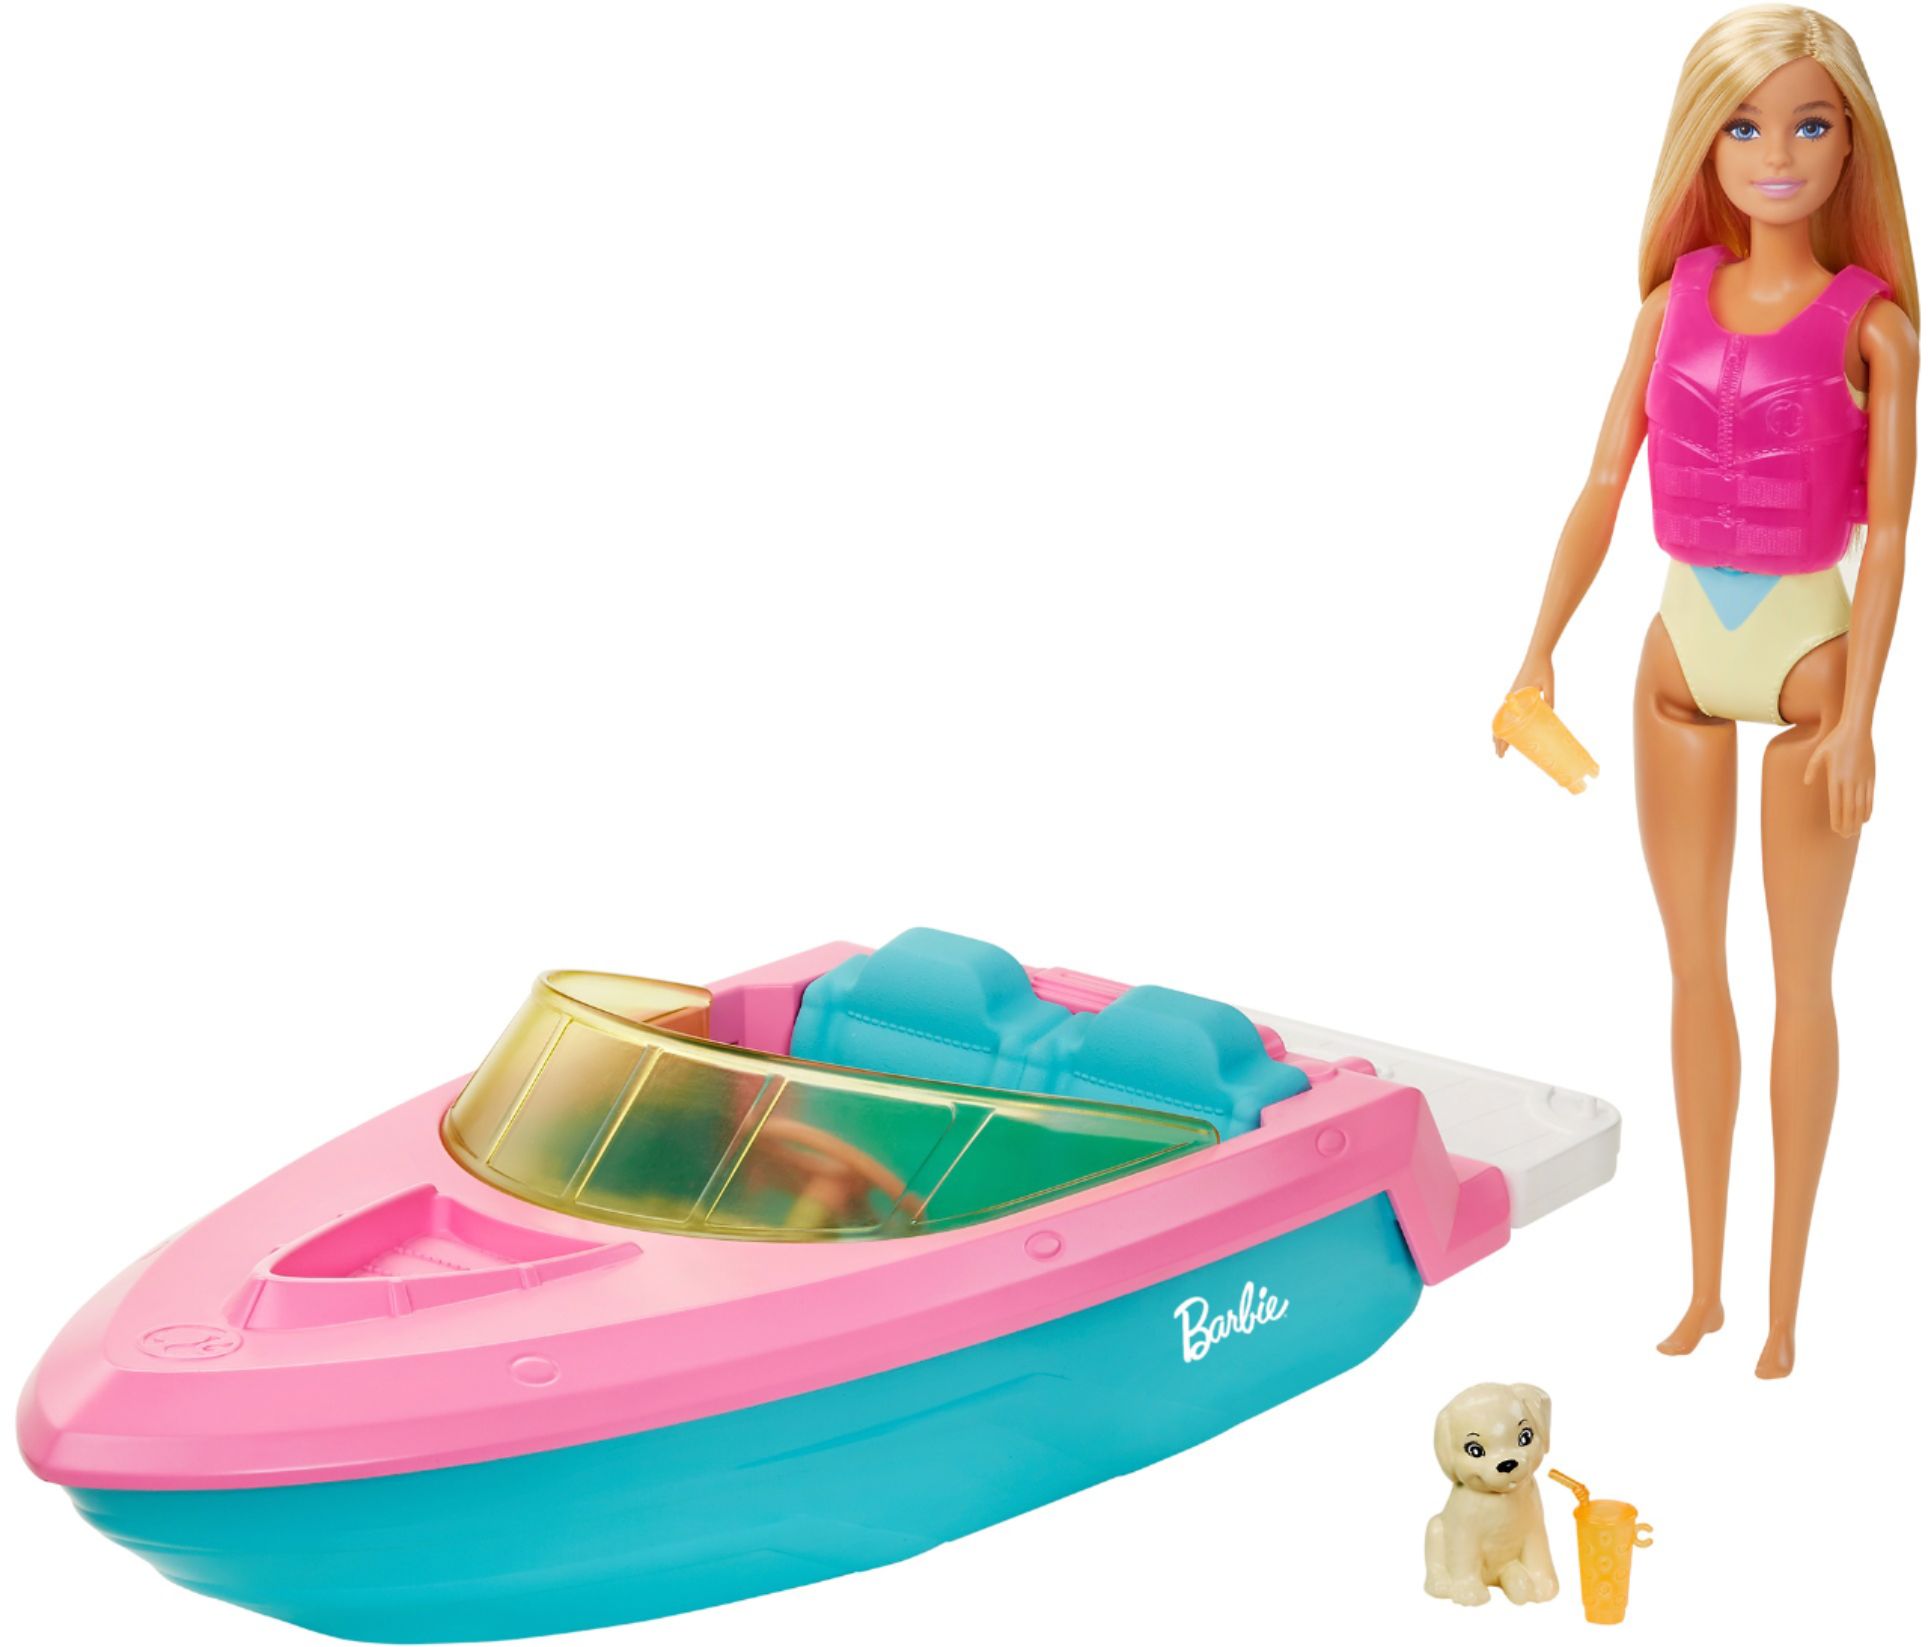 New pink house rides the Barbie wave